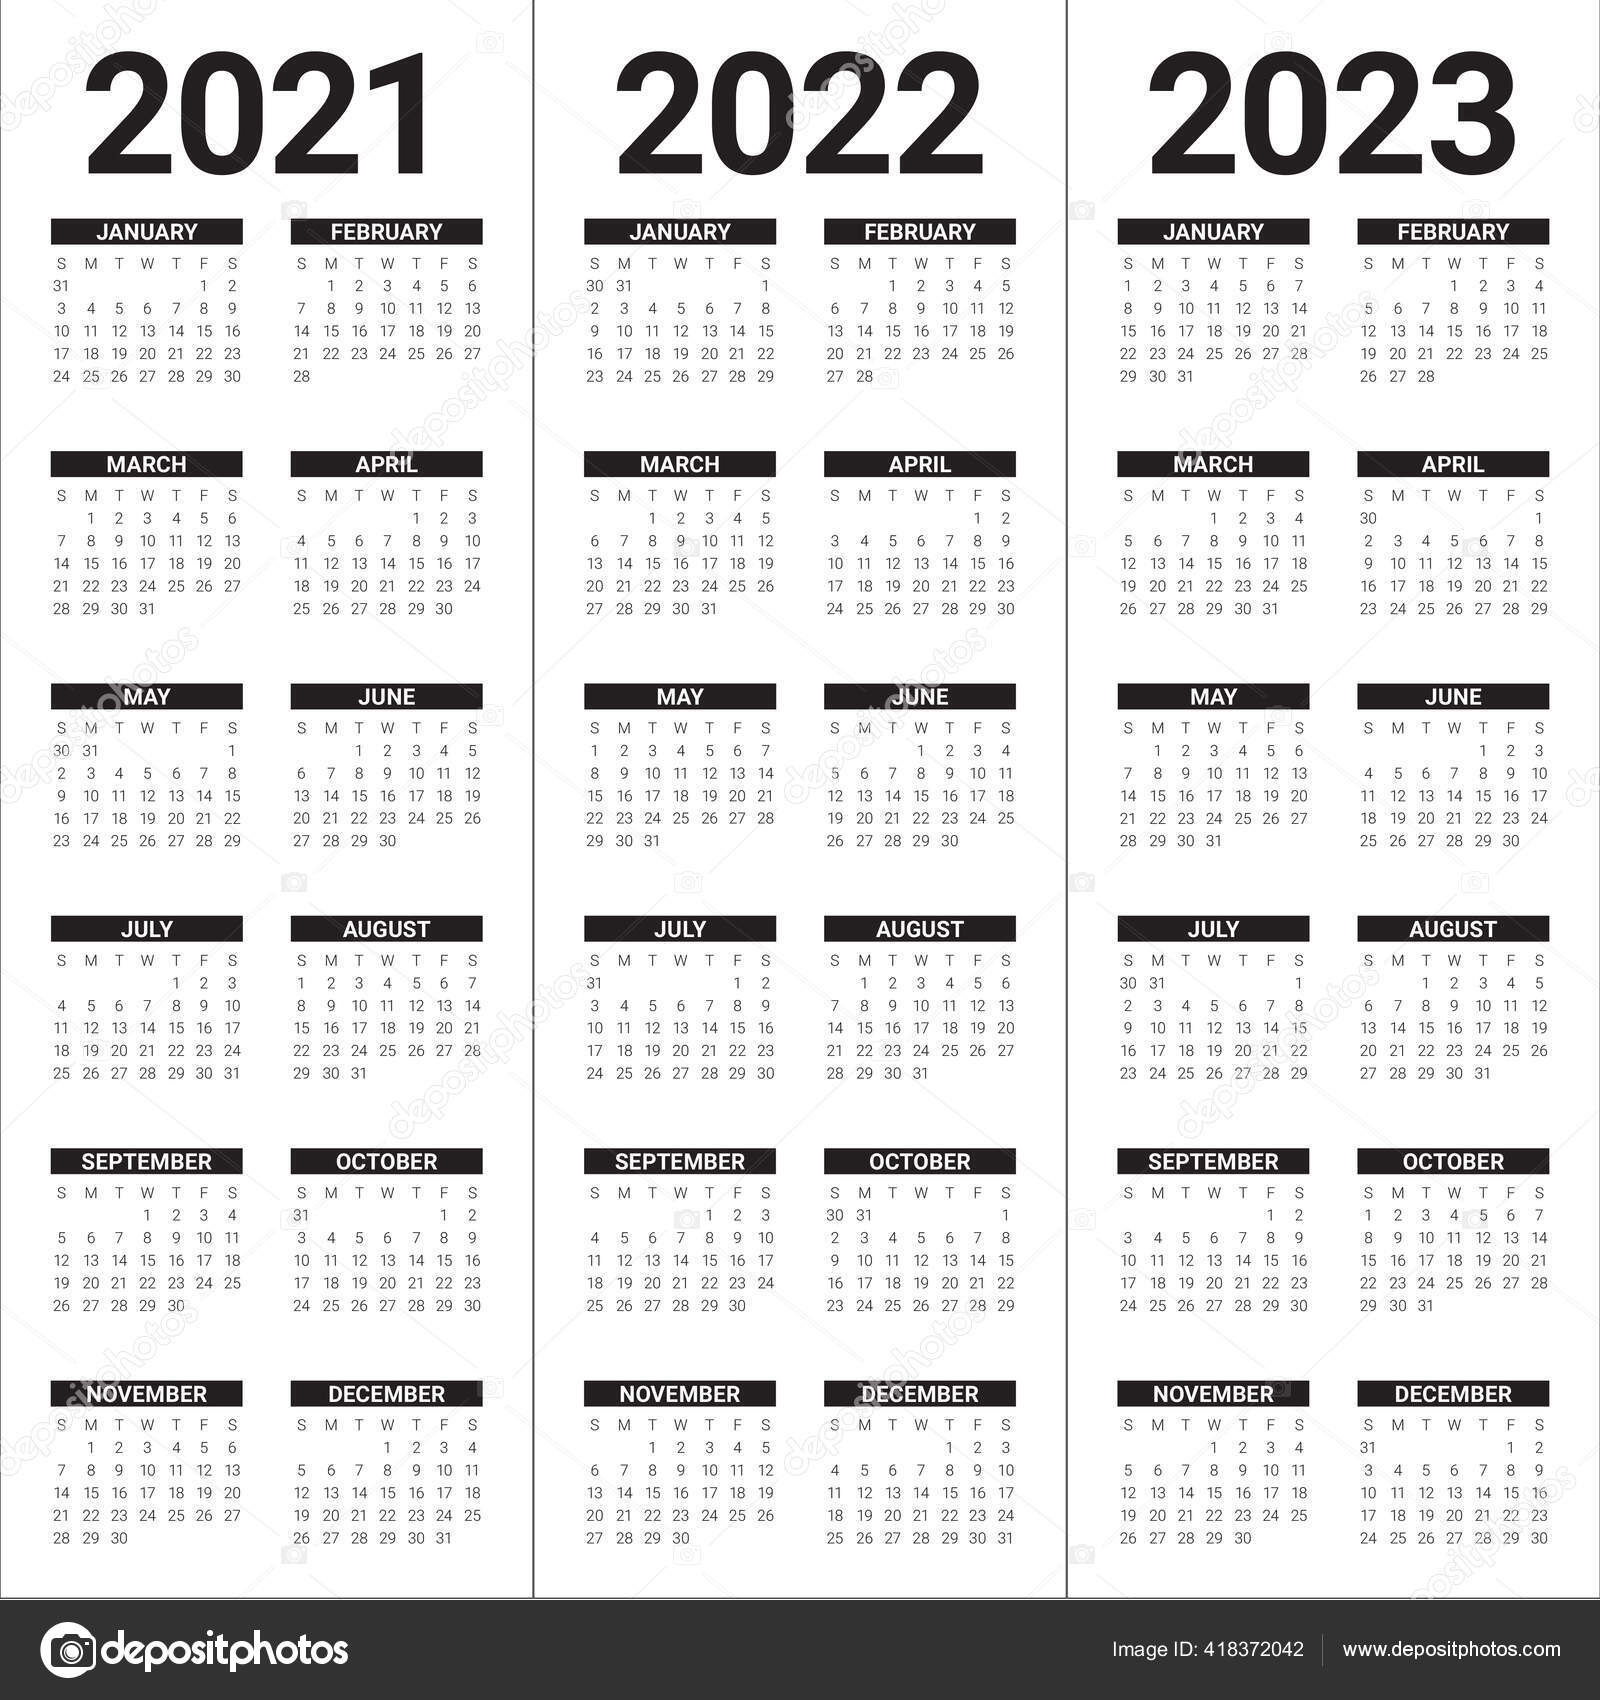 Uci 2022 2023 Calendar Year 2021 2022 2023 Calendar Vector Design Template Simple Clean Stock  Vector Image By ©Dolphfynlow #418372042